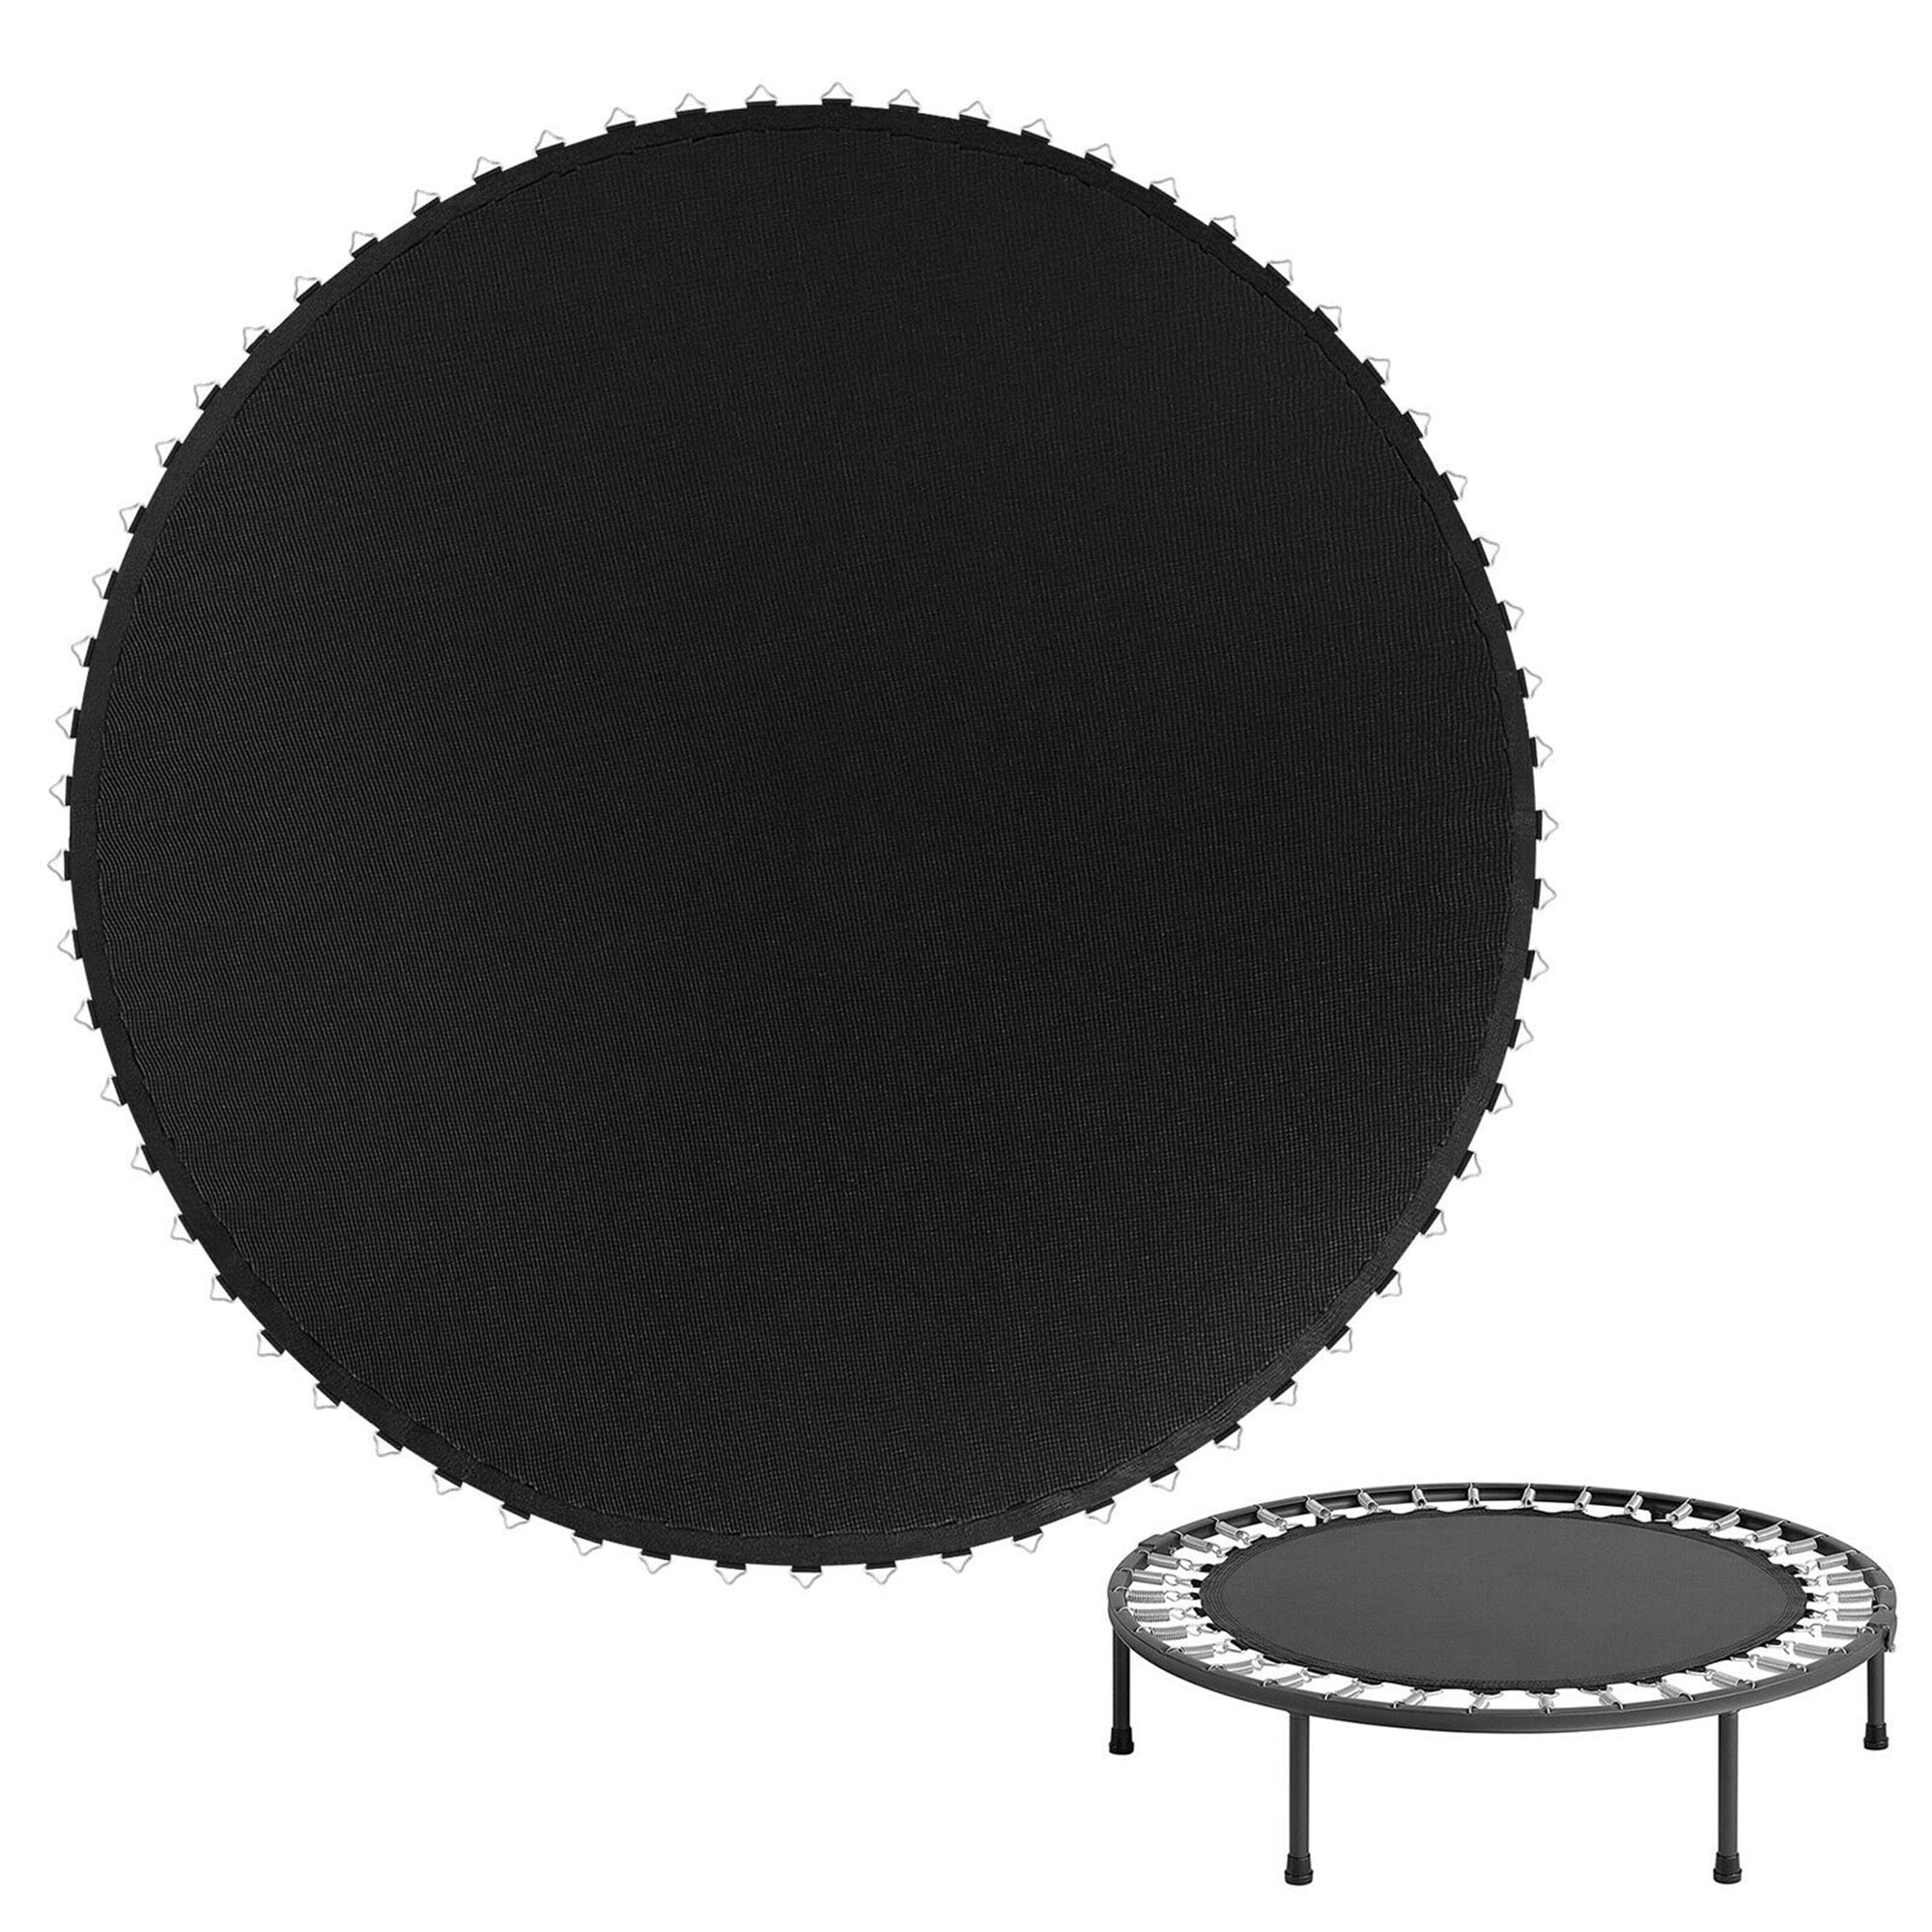 6/8/10/12ft Trampoline Mat Replacement Round Frame V-rings Hook Buckle Black 